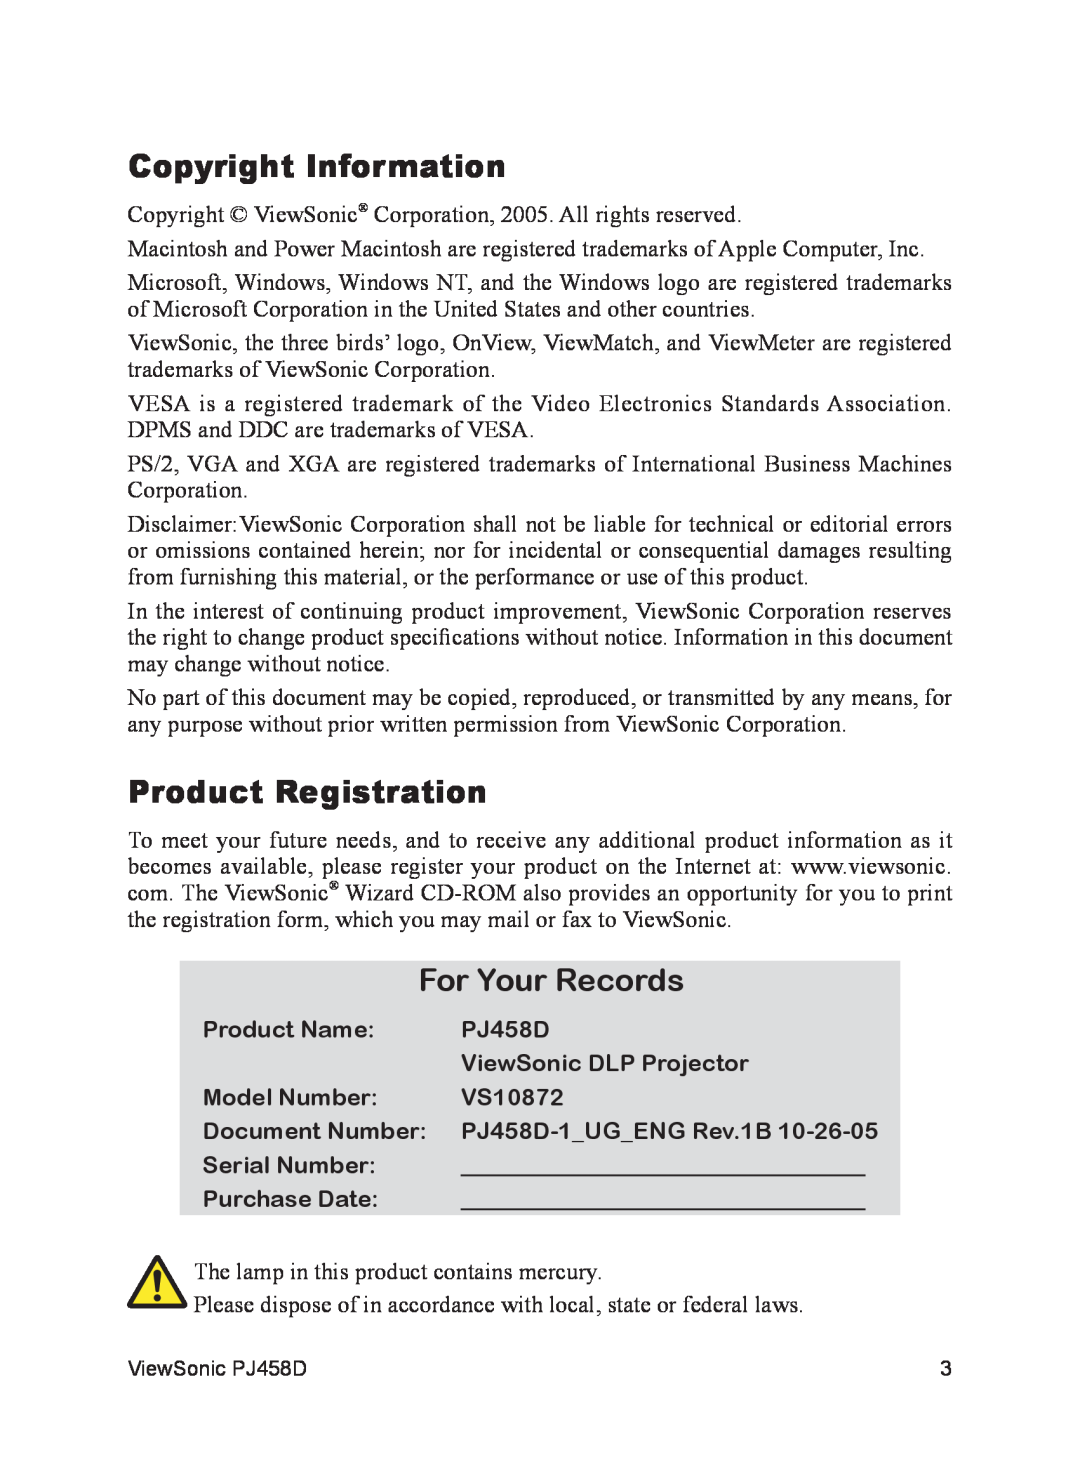 ViewSonic PJ458D Copyright Information, Product Registration, For Your Records, Product Name, ViewSonic DLP Projector 